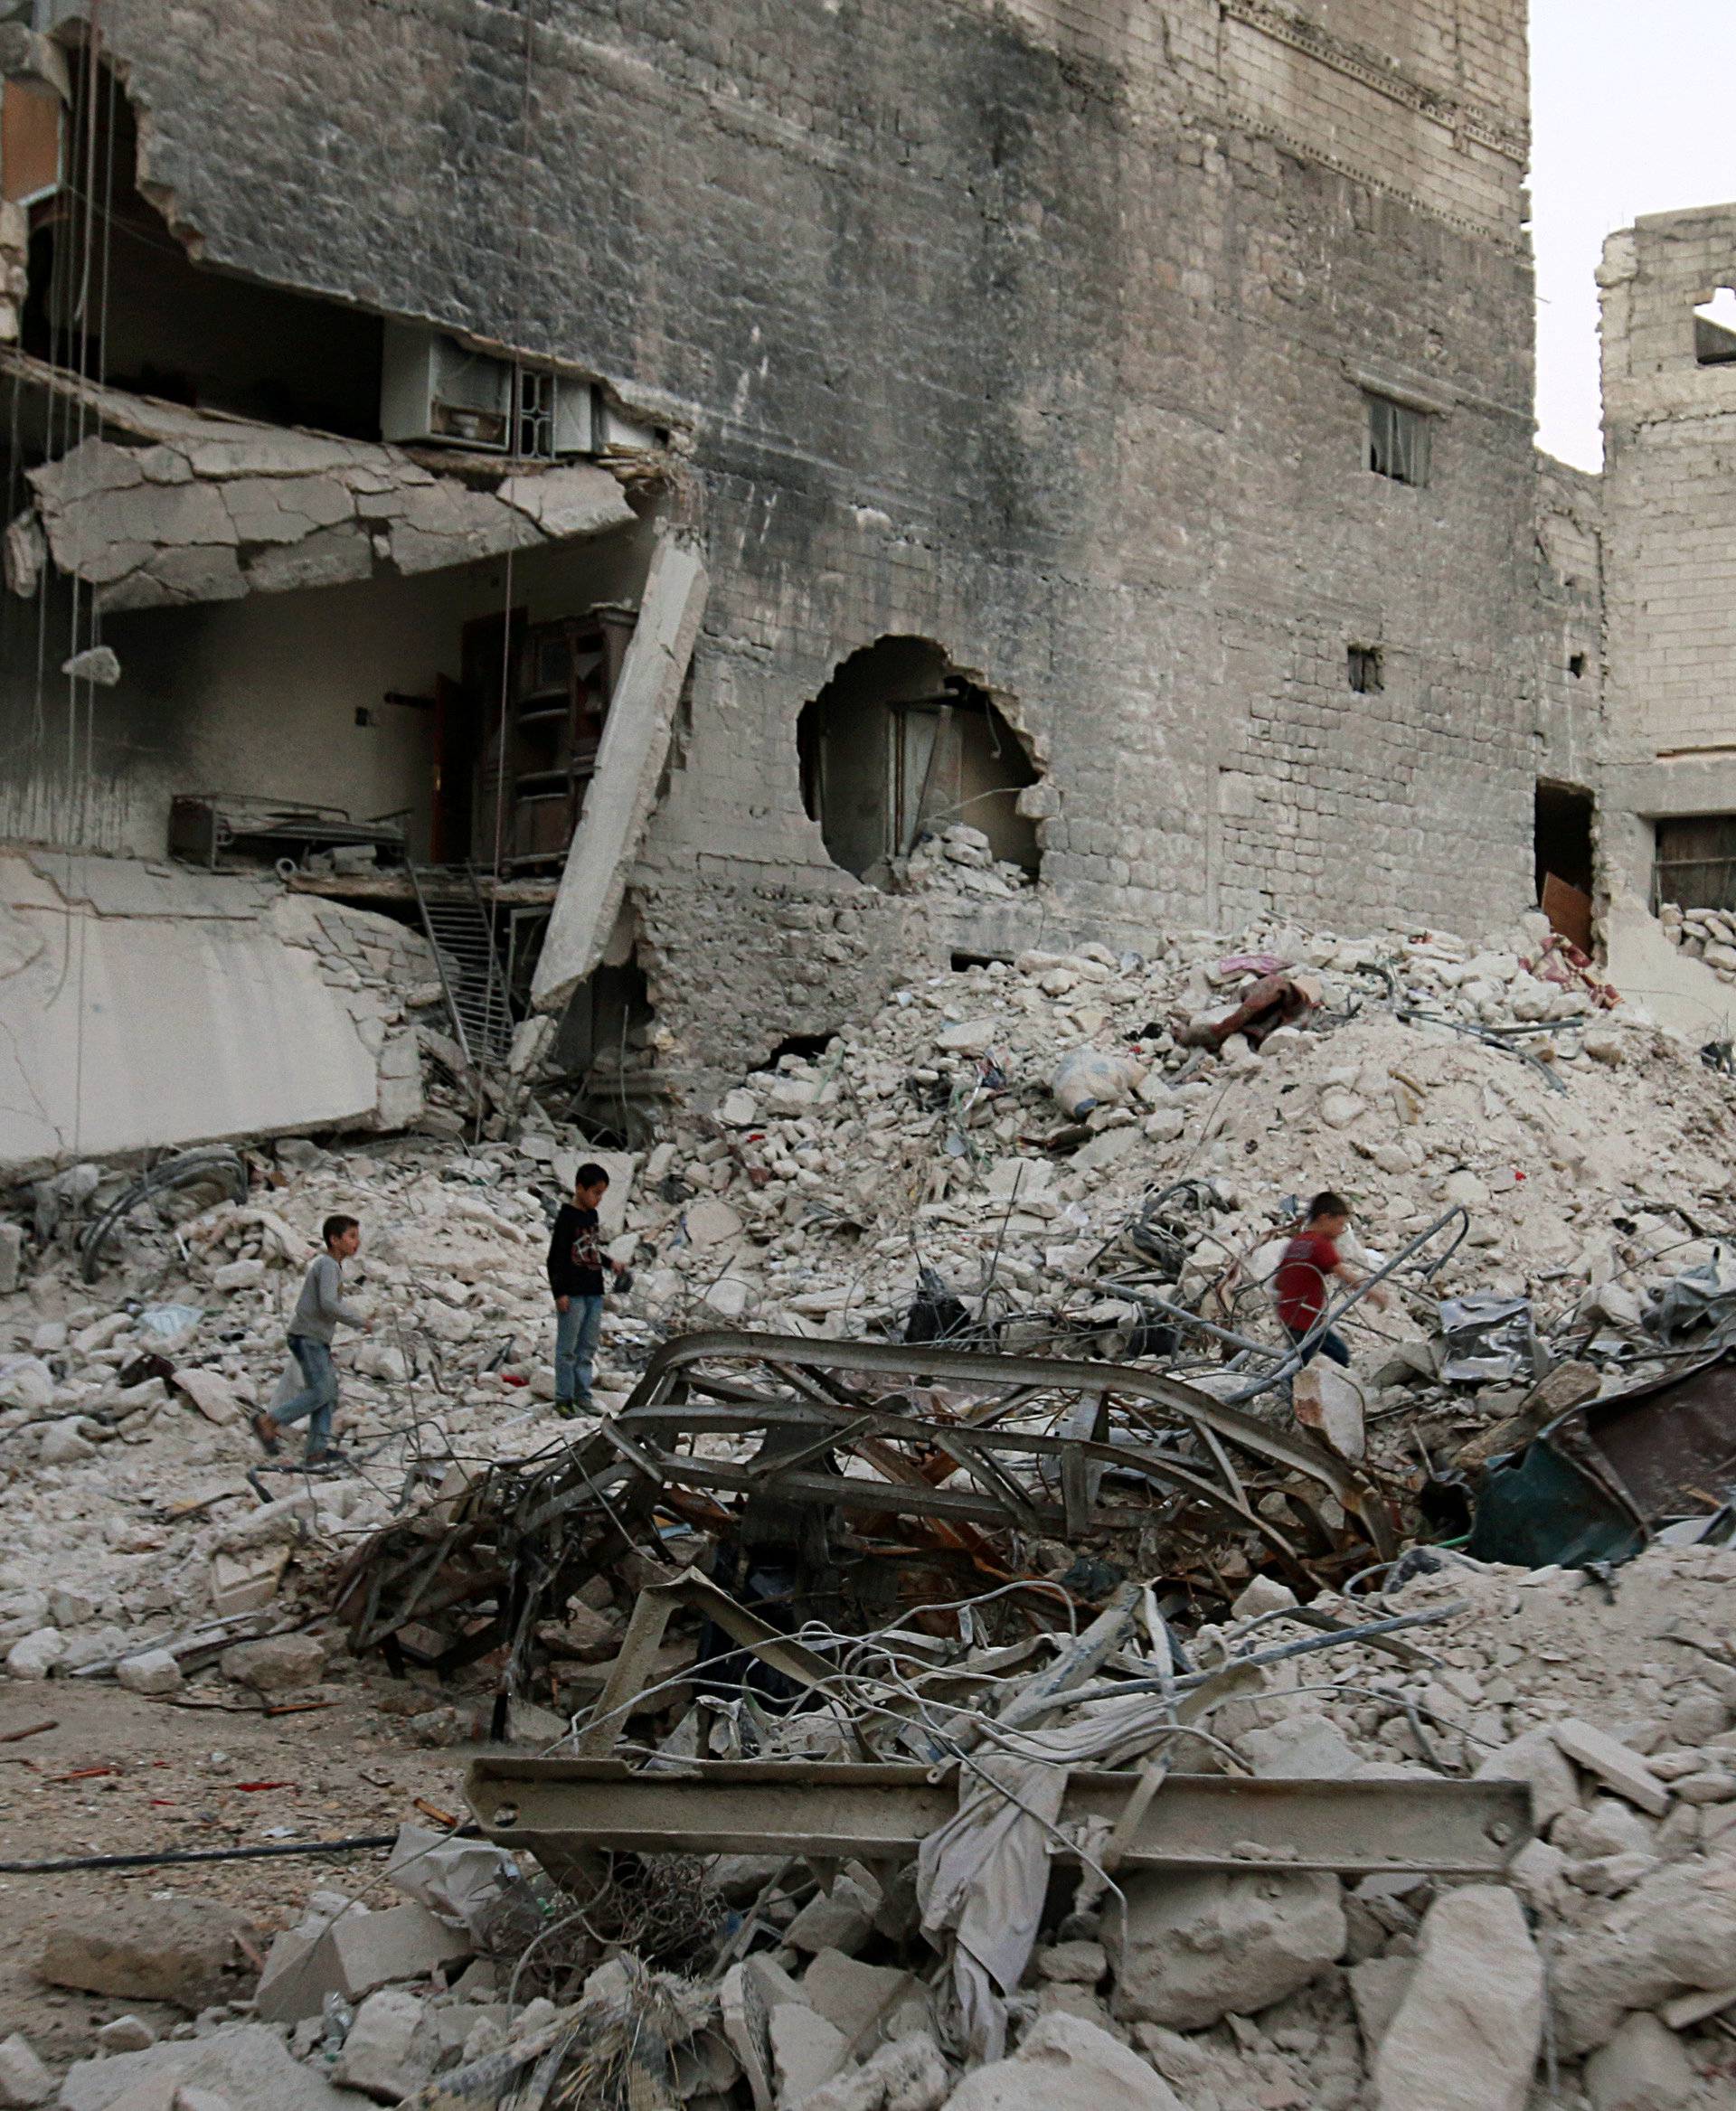 Boys make their way through the rubble of damaged buildings in the rebel held area of al-Kalaseh neighbourhood of Aleppo